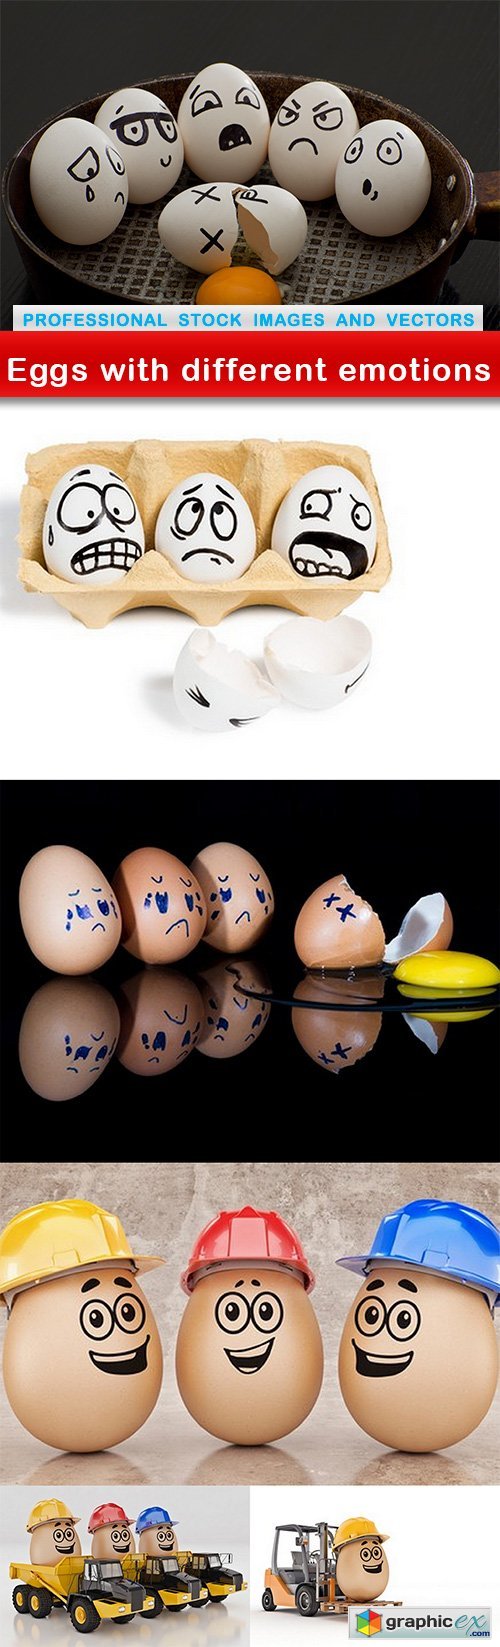 Eggs with different emotions - 6 UHQ JPEG